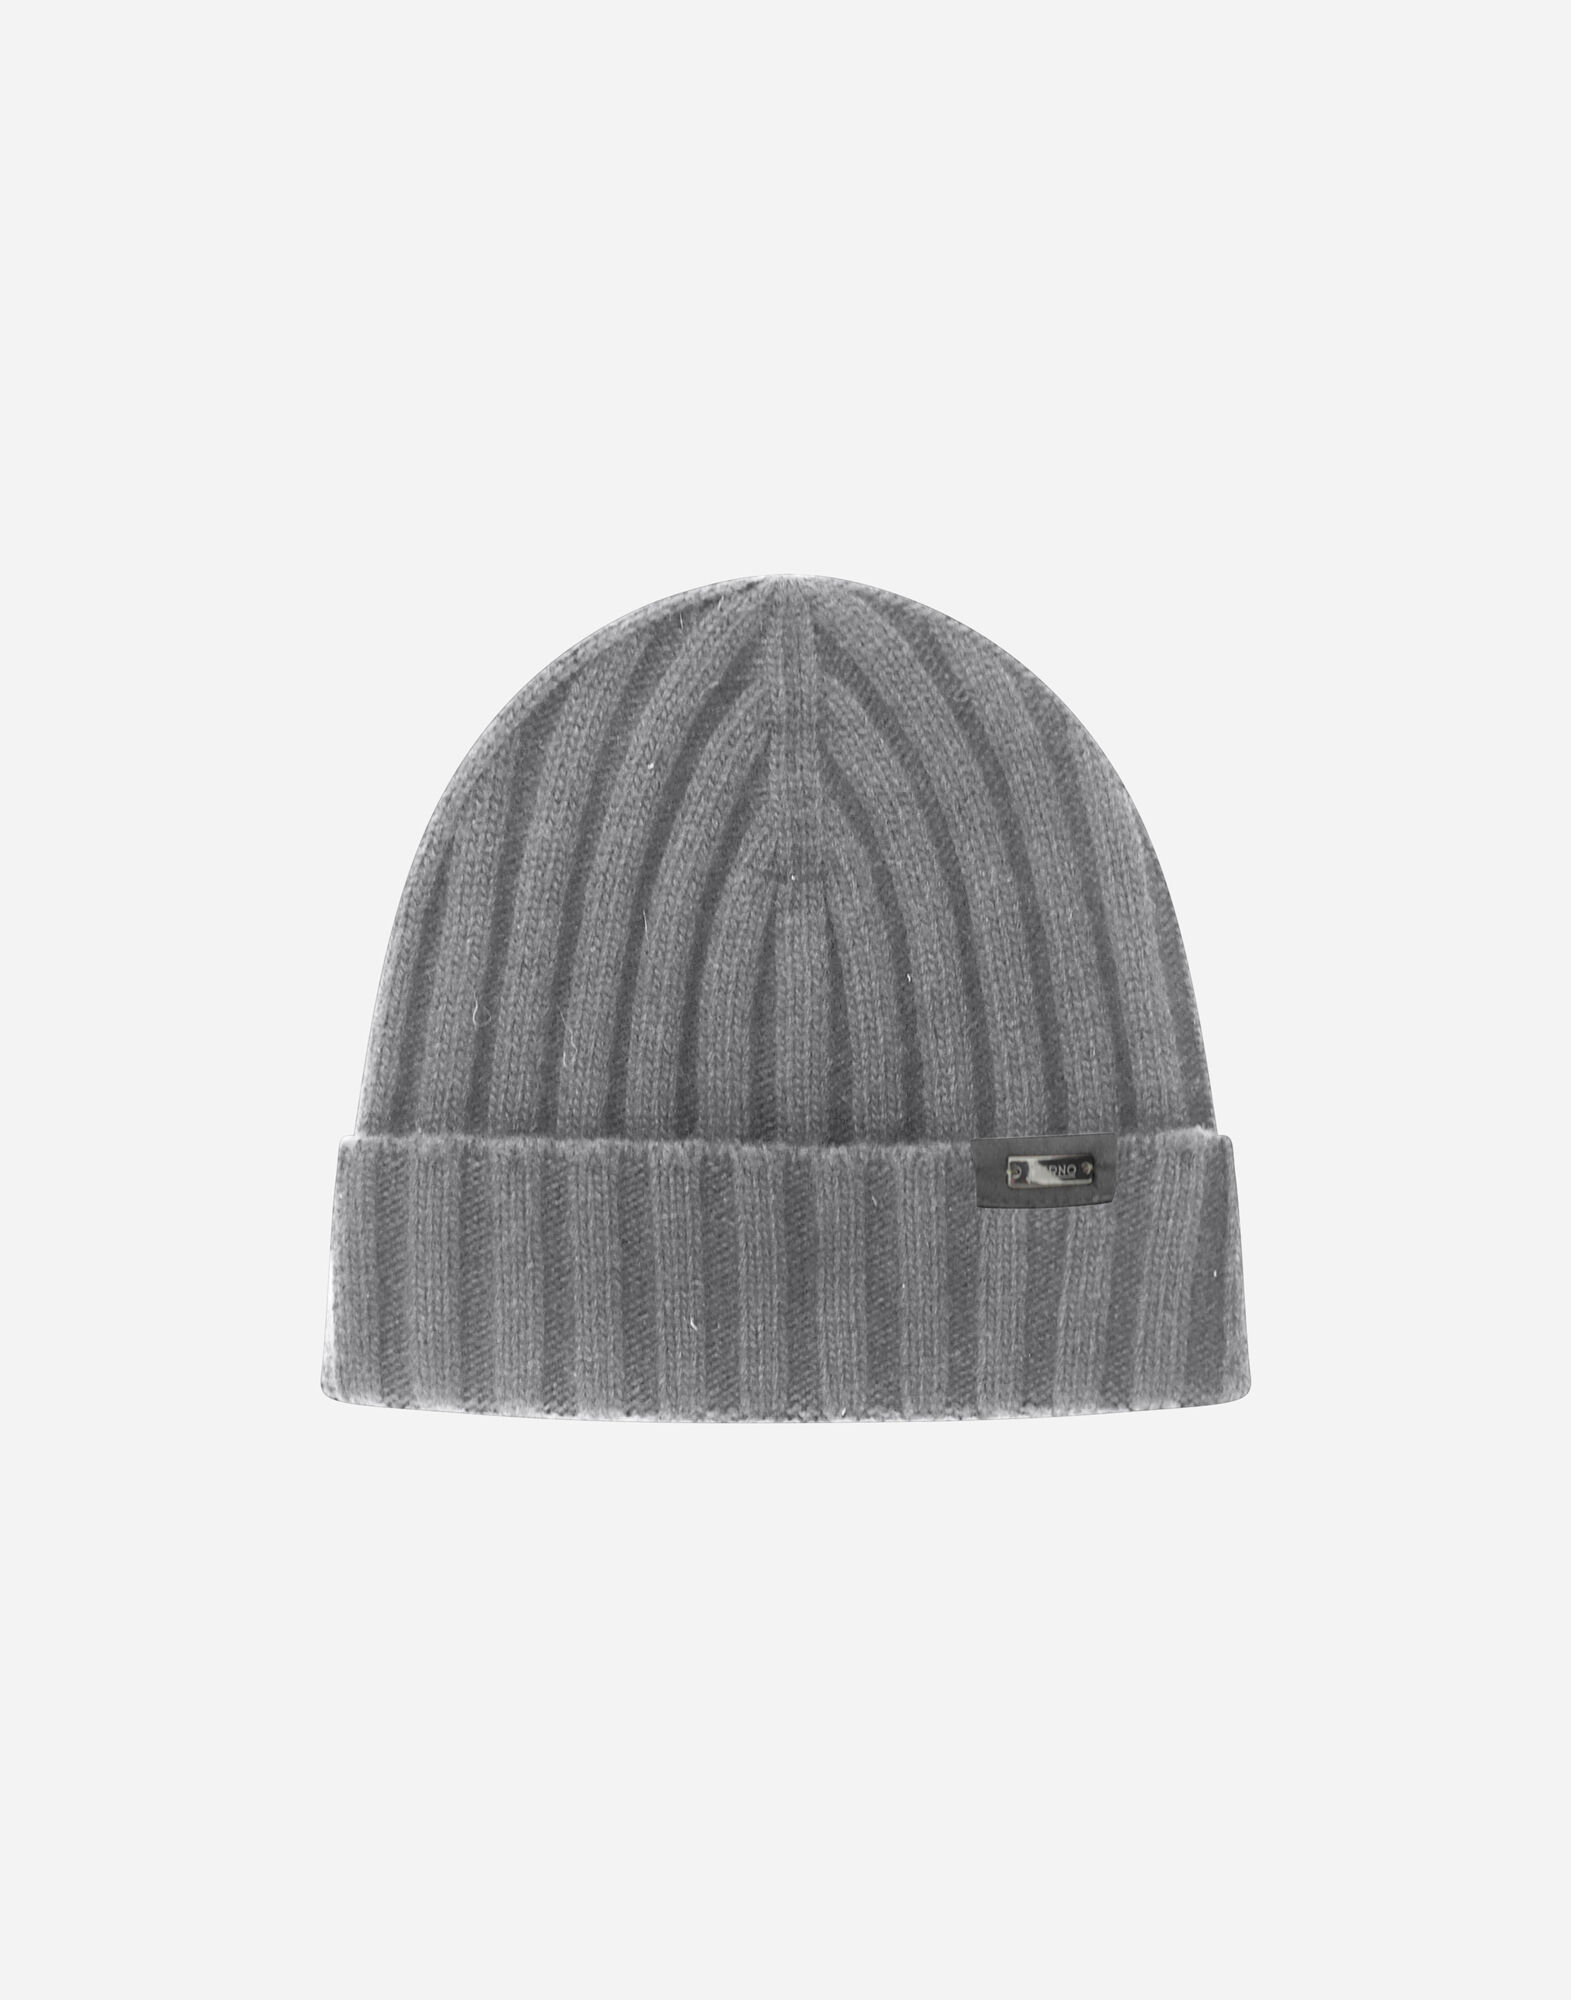 Herno Wool Cashmere Beanie in Grey Mens Hats Herno Hats Grey for Men 